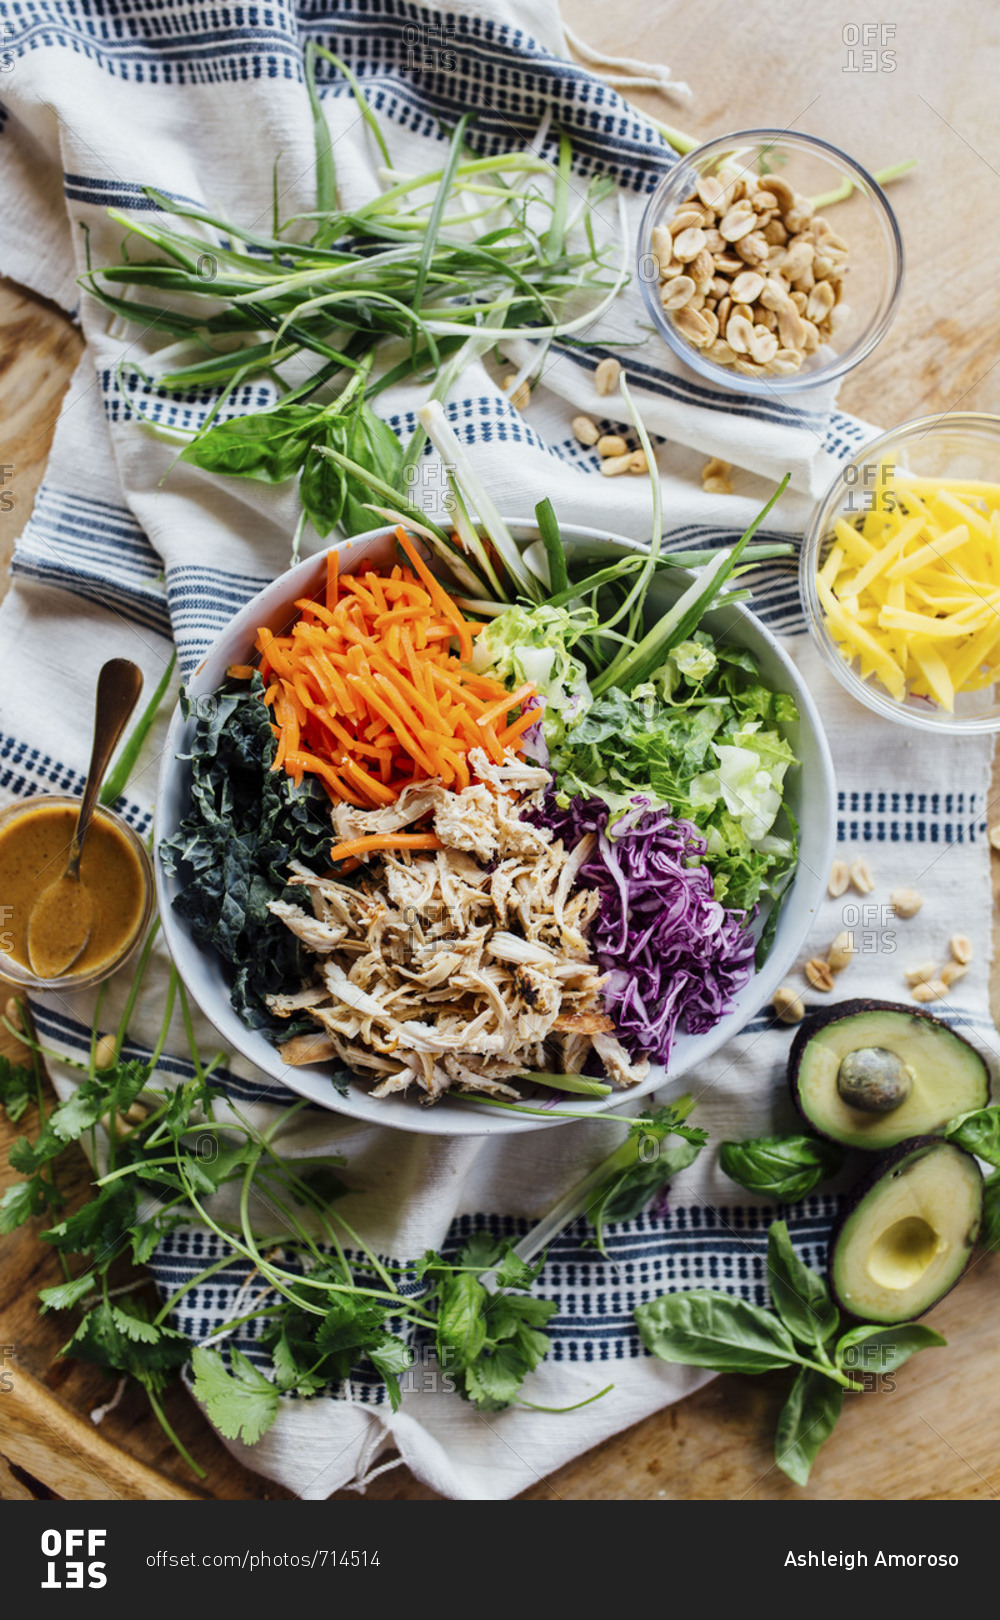 Beautiful garden salad with shredded chicken avocado and greens